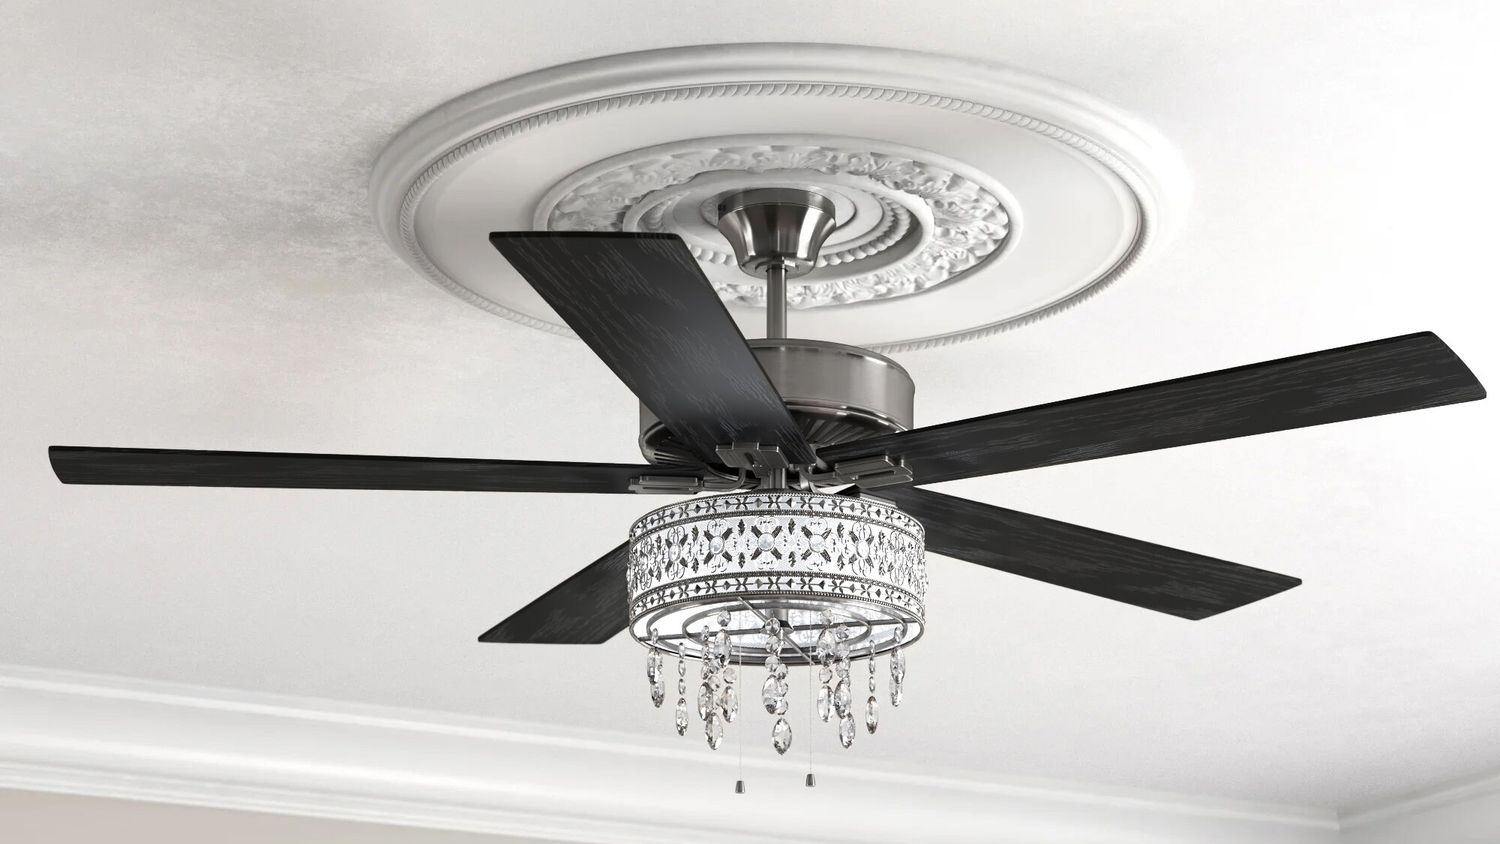 The 10 Best Ceiling Fans In 2021, What Are The Best Brand Ceiling Fans